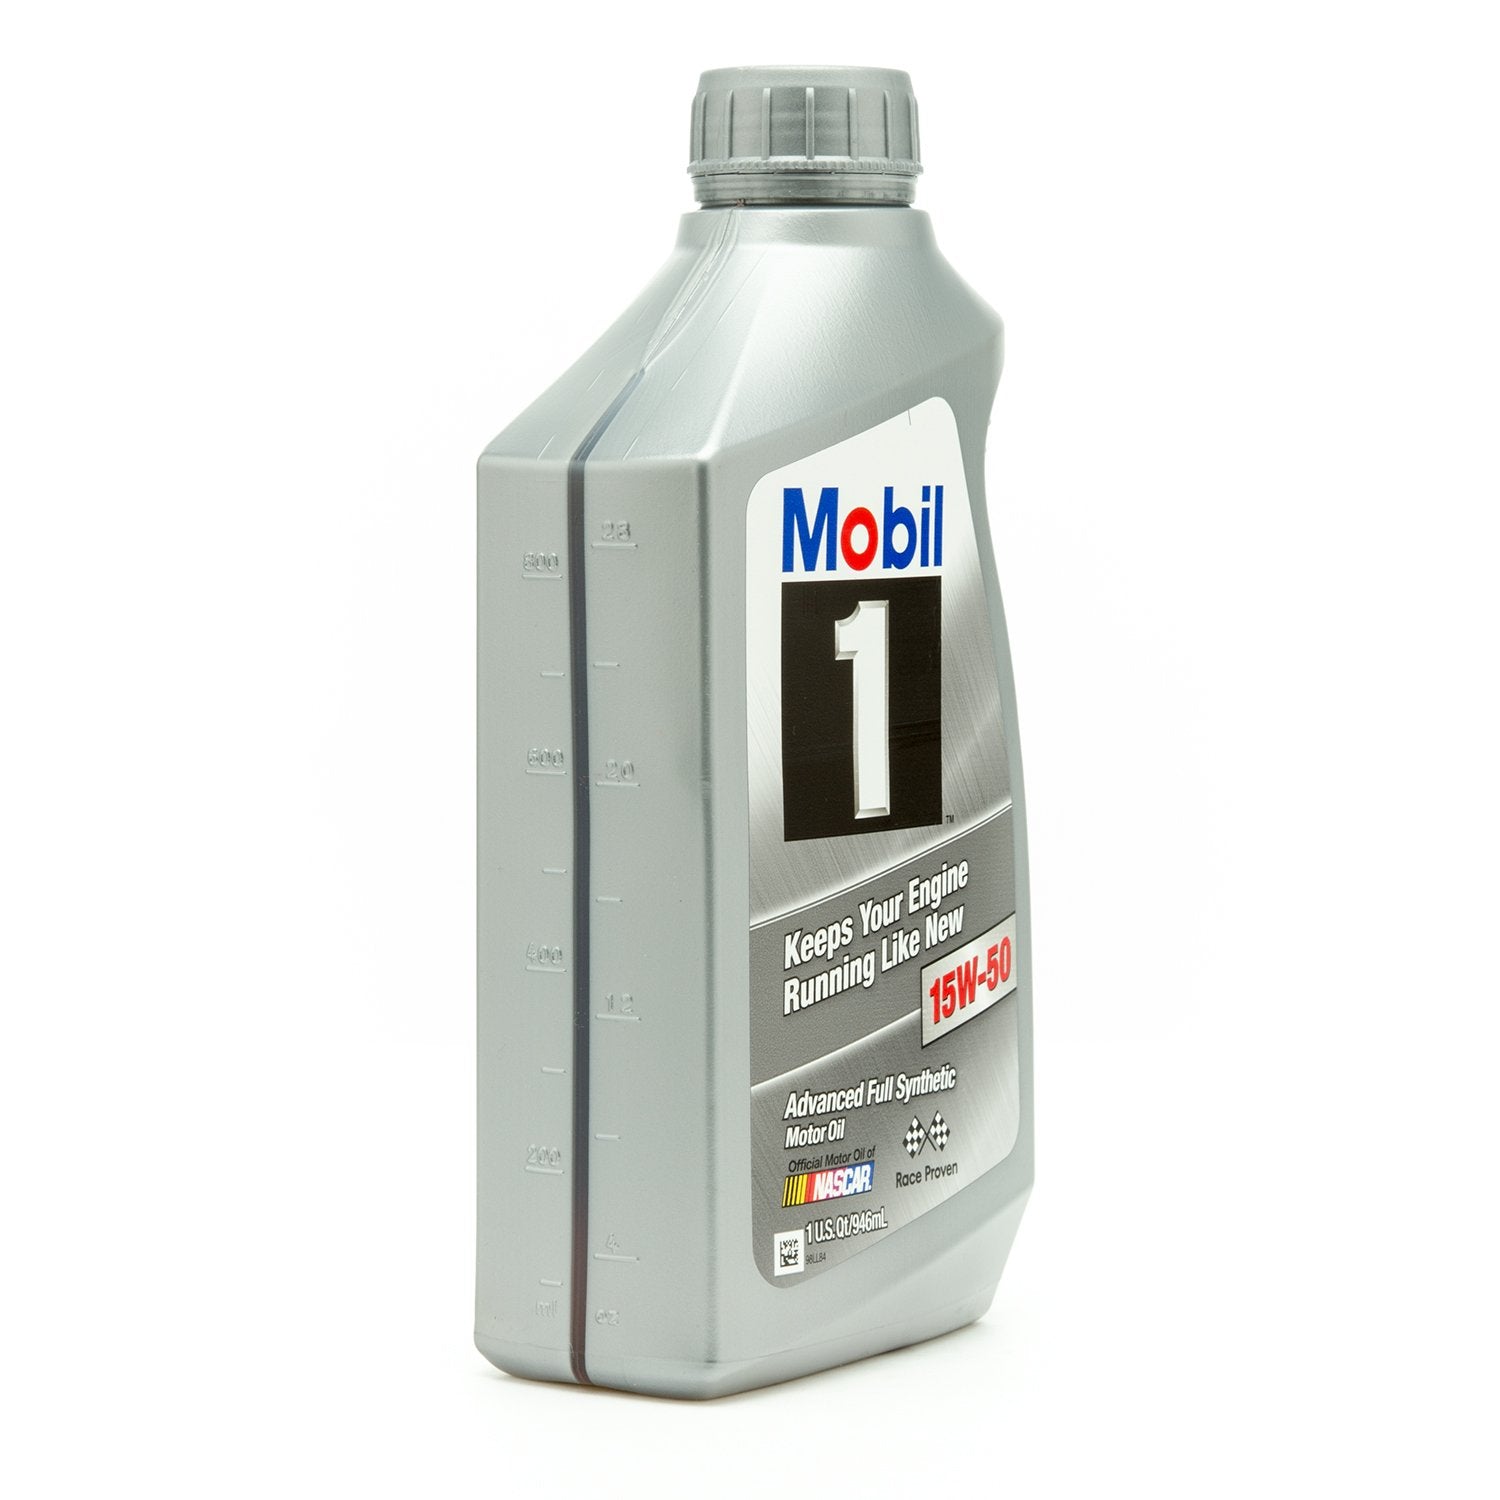 Mobil 1 Supersyn Fully Synthetic Motor Oil, 15W-50, quart (201)